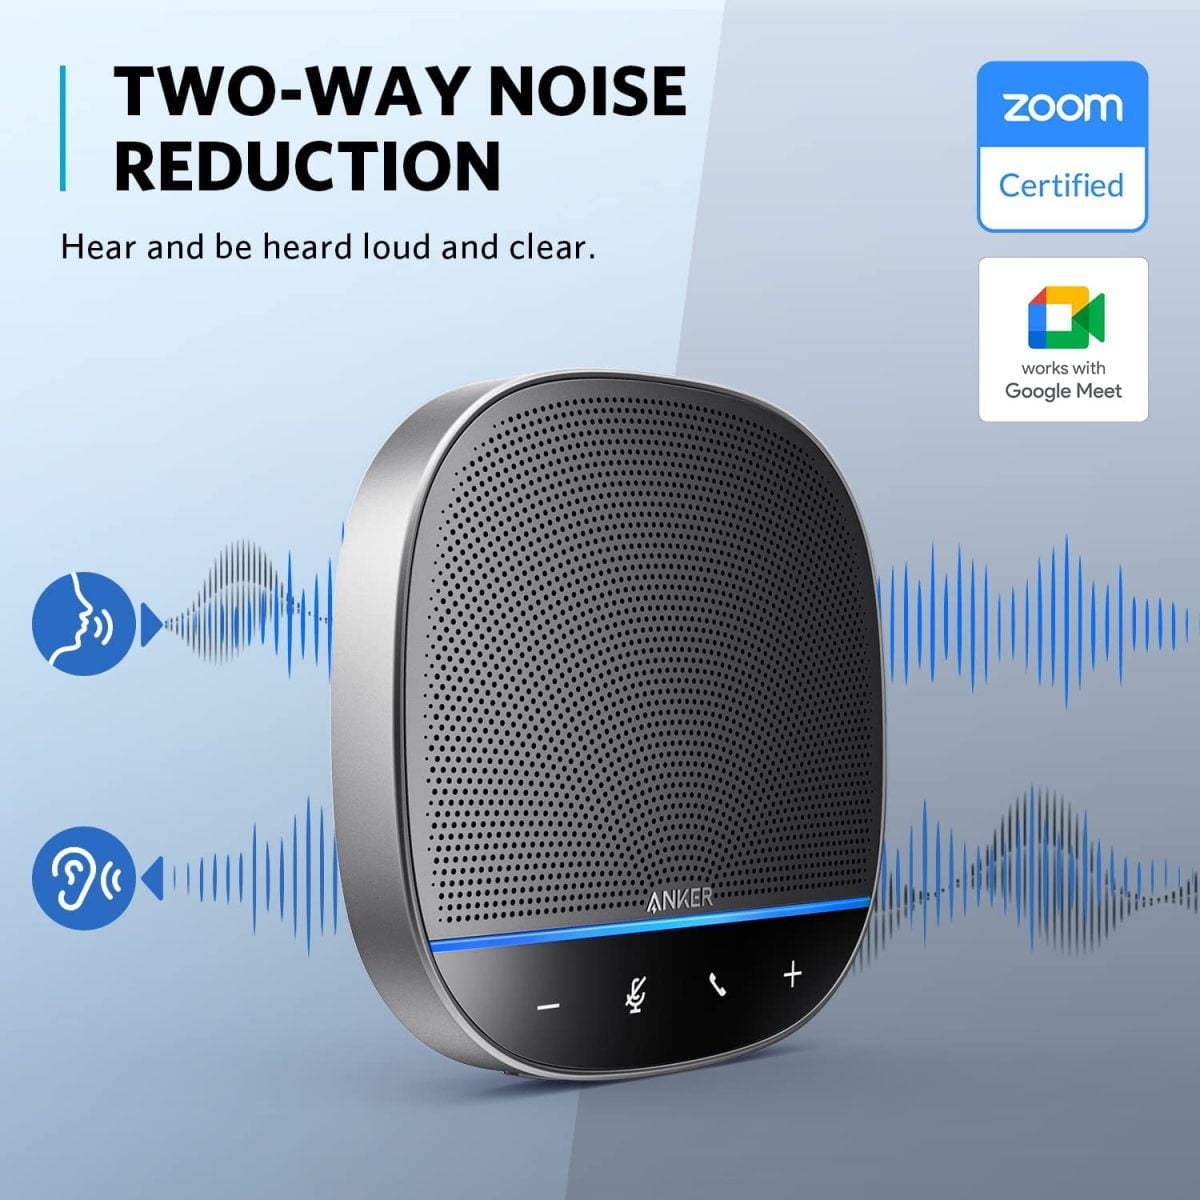 71Egmzbwwol. Ac Sl1500 Anker &Lt;H1&Gt;Anker Powerconf S500 Speakerphone&Lt;/H1&Gt; Https://Www.youtube.com/Watch?V=Sycc9Ymn27K &Lt;Ul Class=&Quot;A-Unordered-List A-Vertical A-Spacing-Mini&Quot;&Gt; &Lt;Li&Gt;&Lt;Span Class=&Quot;A-List-Item&Quot;&Gt;Voiceradar Technology: Powerconf S500 Speakerphone Automatically Focuses On Voice Sources In The Room While Eliminating Unwanted Noise. Speech Is Delivered Without Any Of The Echos And Distractions Of A Hectic Meeting Room.&Lt;/Span&Gt;&Lt;/Li&Gt; &Lt;Li&Gt;&Lt;Span Class=&Quot;A-List-Item&Quot;&Gt;Sensitive Voice Pickup: 4 Microphones With 32Khz Sampling Rate Transmit Your Voice In Stunning Definition And Clarity. Full Duplex Communication Ensures Clear 2-Way Audio Even When Both Ends Are Speaking Simultaneously.&Lt;/Span&Gt;&Lt;/Li&Gt; &Lt;Li&Gt;&Lt;Span Class=&Quot;A-List-Item&Quot;&Gt;Seamless Experience: Powerconf S500 Has Zoom Rooms Certification And Works With Google Meet To Ensure High-Quality And Reliable Communication Experiences On Third Party Platforms.&Lt;/Span&Gt;&Lt;/Li&Gt; &Lt;Li&Gt;&Lt;Span Class=&Quot;A-List-Item&Quot;&Gt;Hi-Fi Grade Sound: An Acoustically Tuned 1.75-Inch Speaker Delivers Performance That Exceeds The Demands Of Ordinary Speakerphones. Music And Other Audio Is Played In Amazing Quality.&Lt;/Span&Gt;&Lt;/Li&Gt; &Lt;Li&Gt;&Lt;Span Class=&Quot;A-List-Item&Quot;&Gt;Double Your Coverage: A Single Powerconf S500 Delivers Performance For Rooms Of Up To 12 People, And You Can Wirelessly Pair Two Of Them To Increase Coverage For Up To 20 People.&Lt;/Span&Gt;&Lt;/Li&Gt; &Lt;Li&Gt;&Lt;Span Class=&Quot;A-List-Item&Quot;&Gt;Easy To Use: Connect To Plug And Play Via Usb-C, Or Wirelessly Via Bluetooth Or The Included Dongle. No It Knowledge Required.&Lt;/Span&Gt;&Lt;/Li&Gt; &Lt;/Ul&Gt; Speakerphone Anker Powerconf S500 Speakerphone